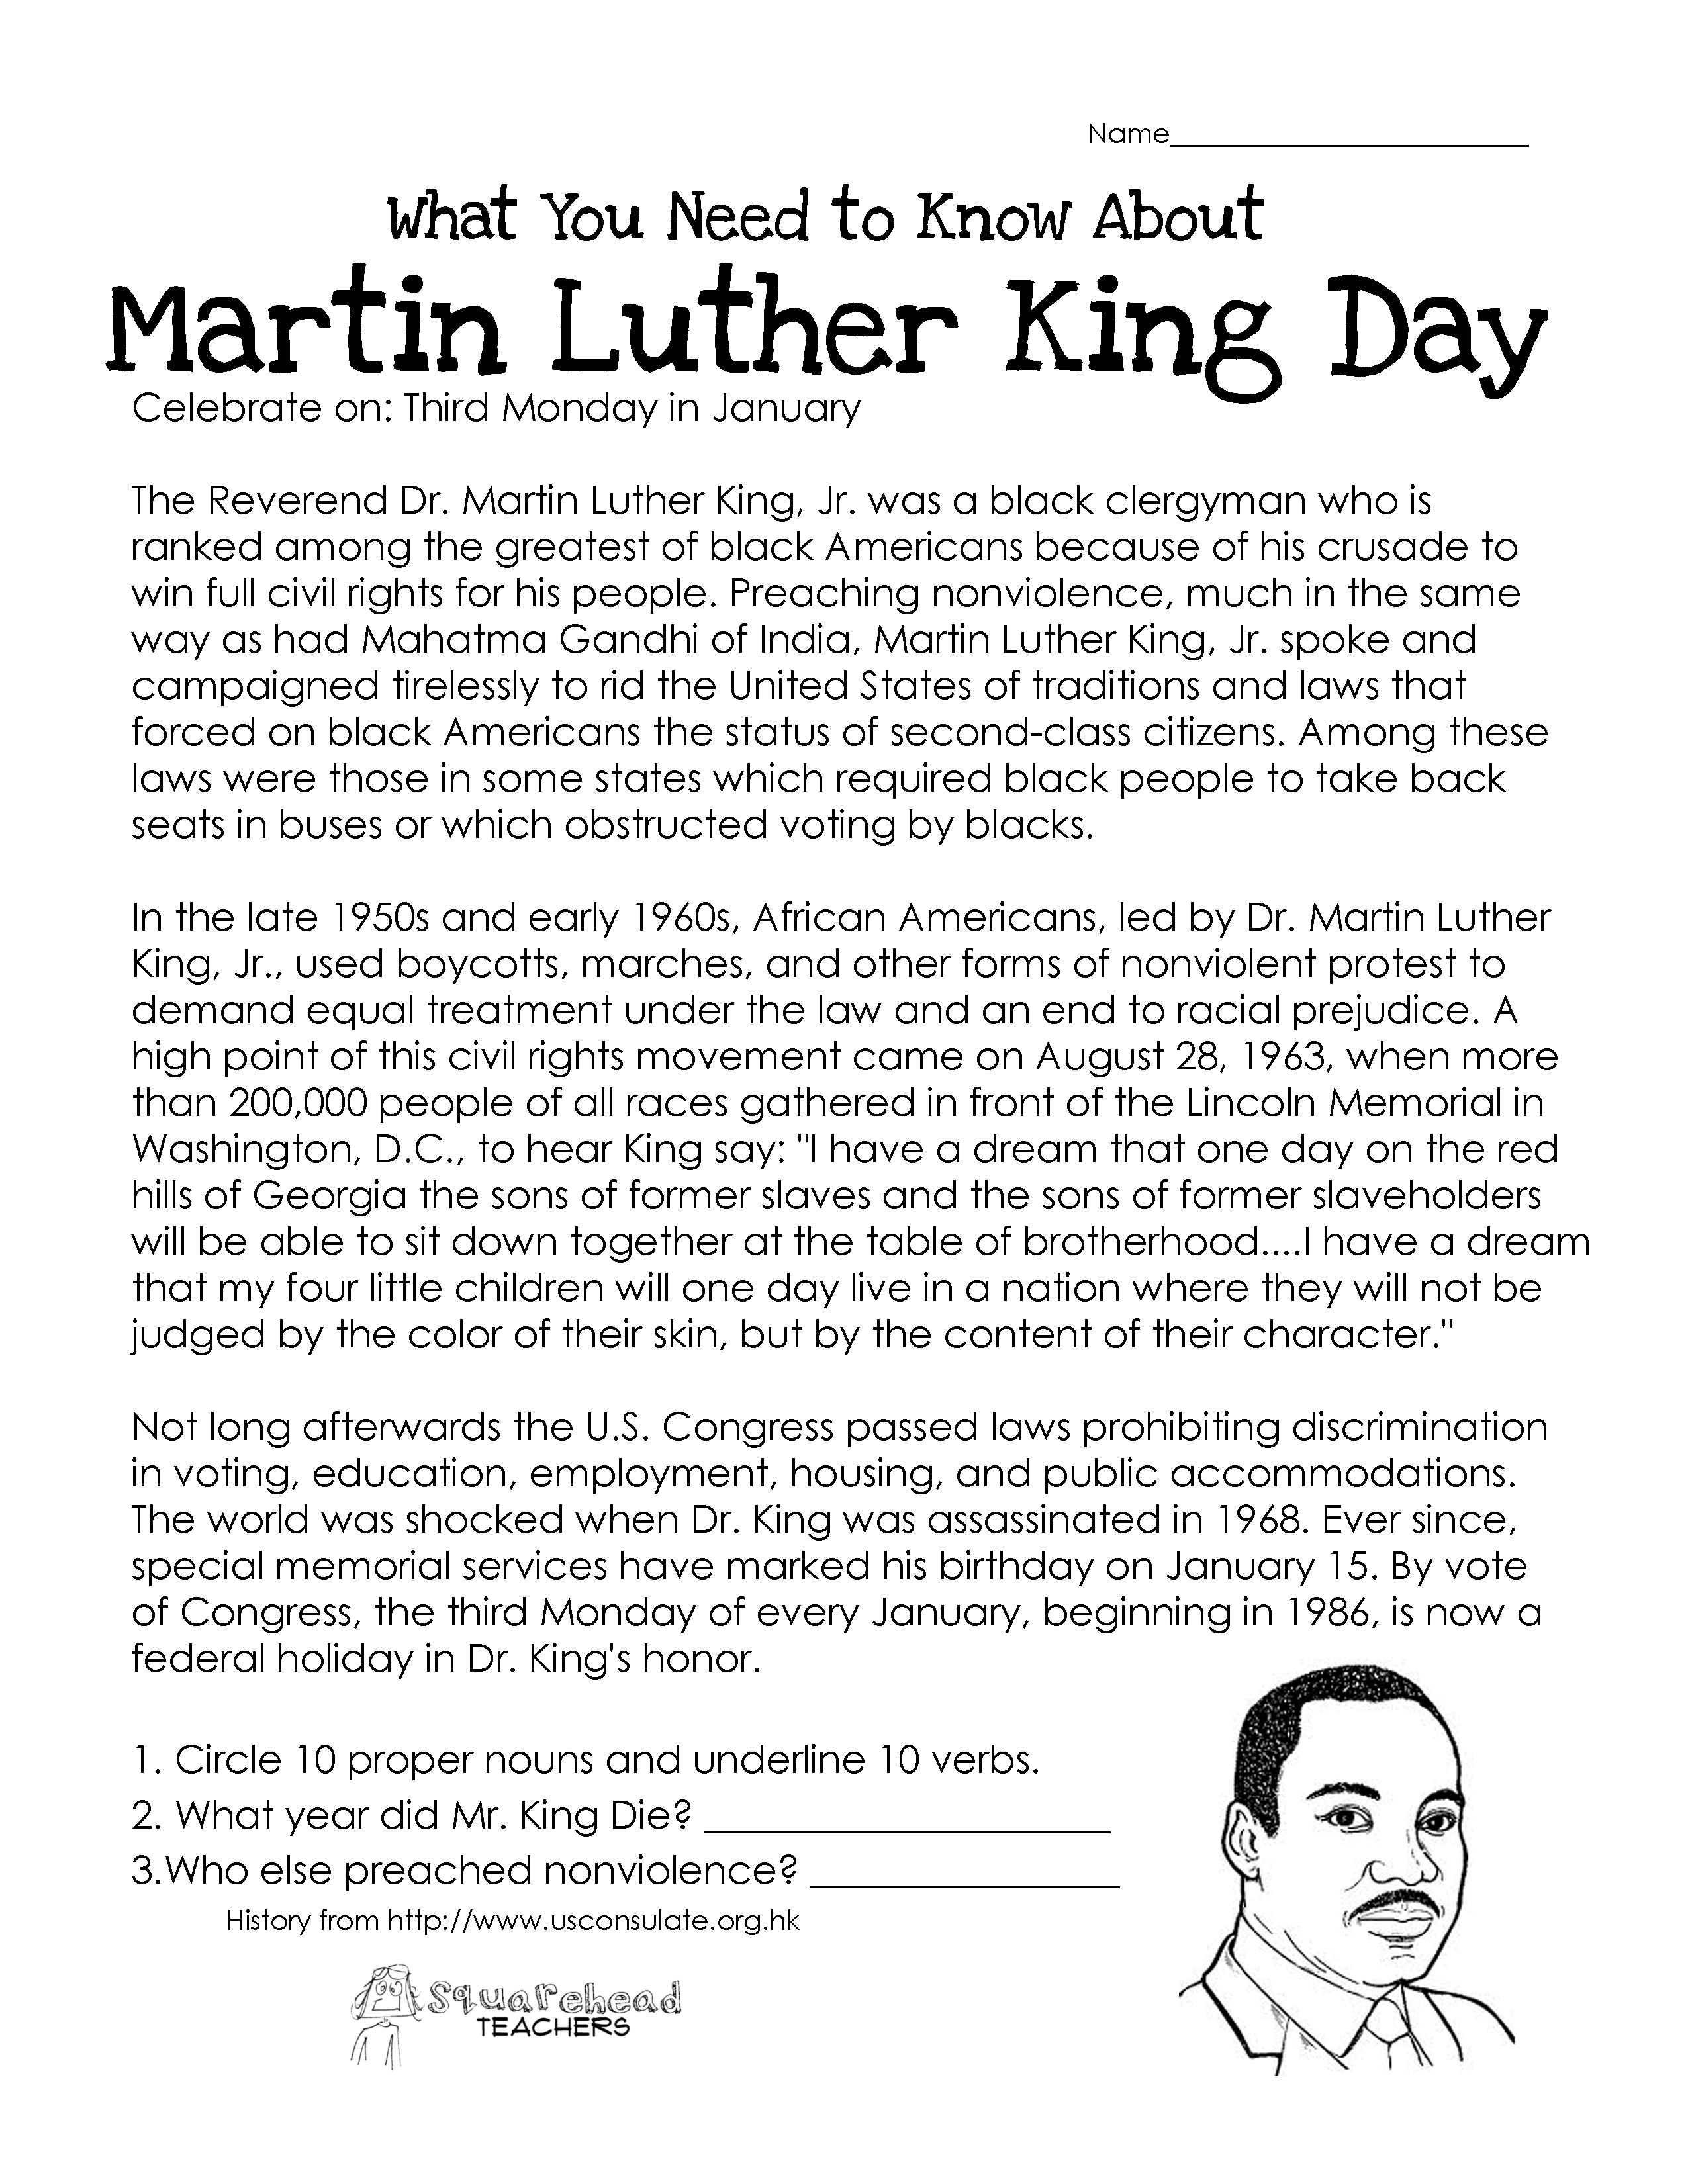 This Free Worksheet About Martin Luther King Day Covers The Basic | Martin Luther King Free Printables Worksheets